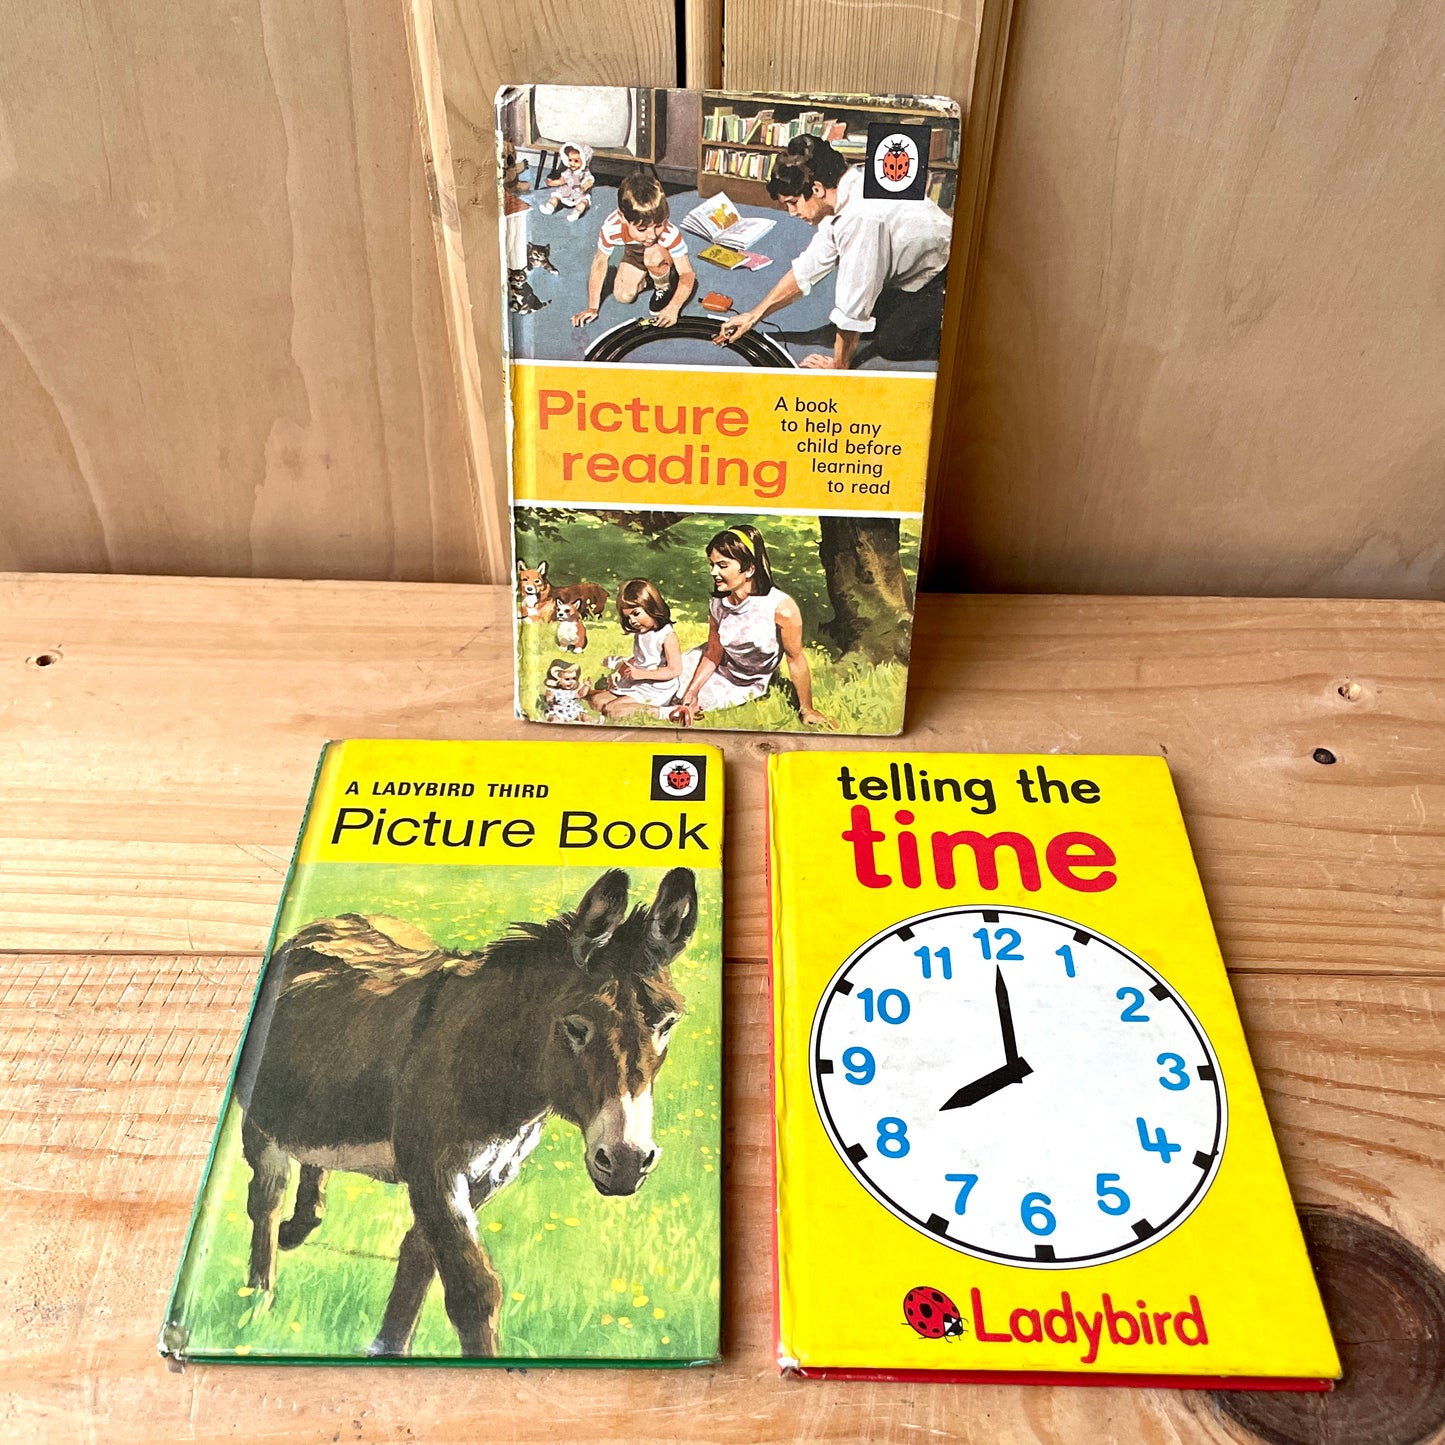 3 book set of Ladybird Picture books.